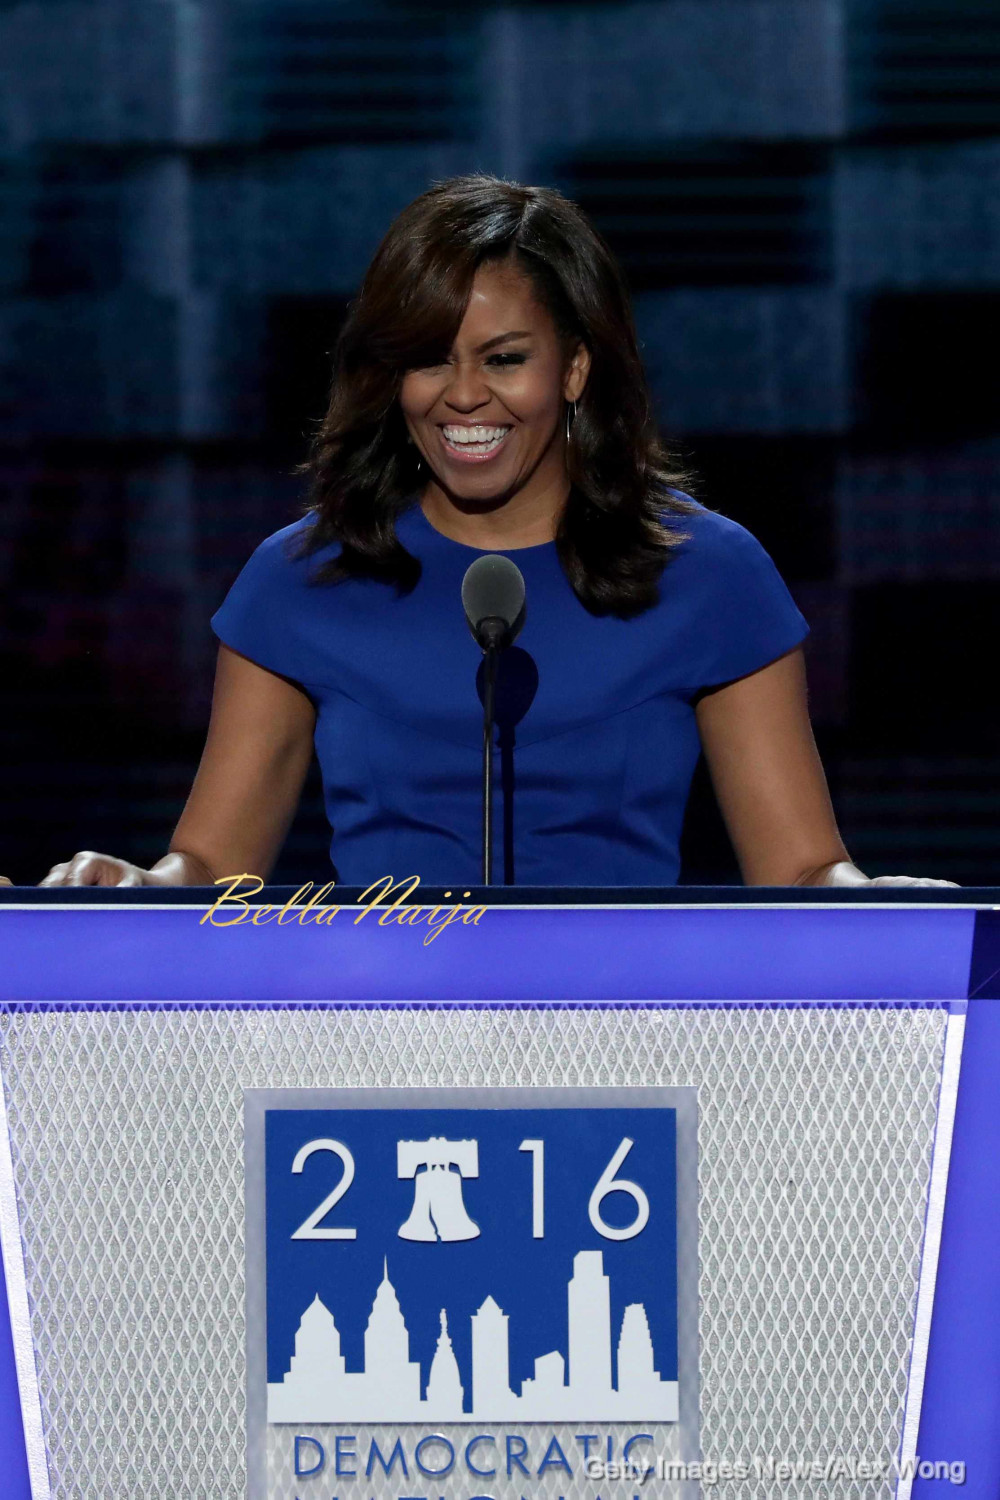 Touching: Michelle Obama's Stirring Speech Brought The Democratic National Convention To Tears